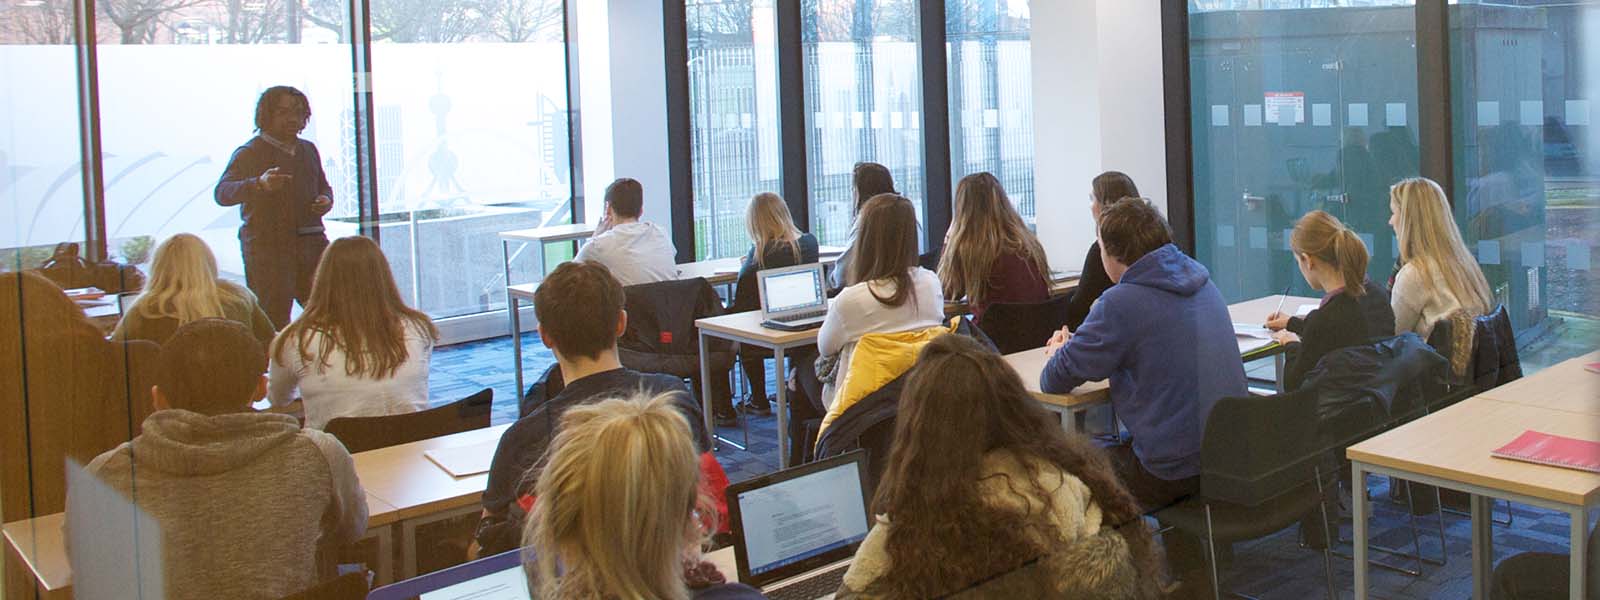 Students studying in the business school